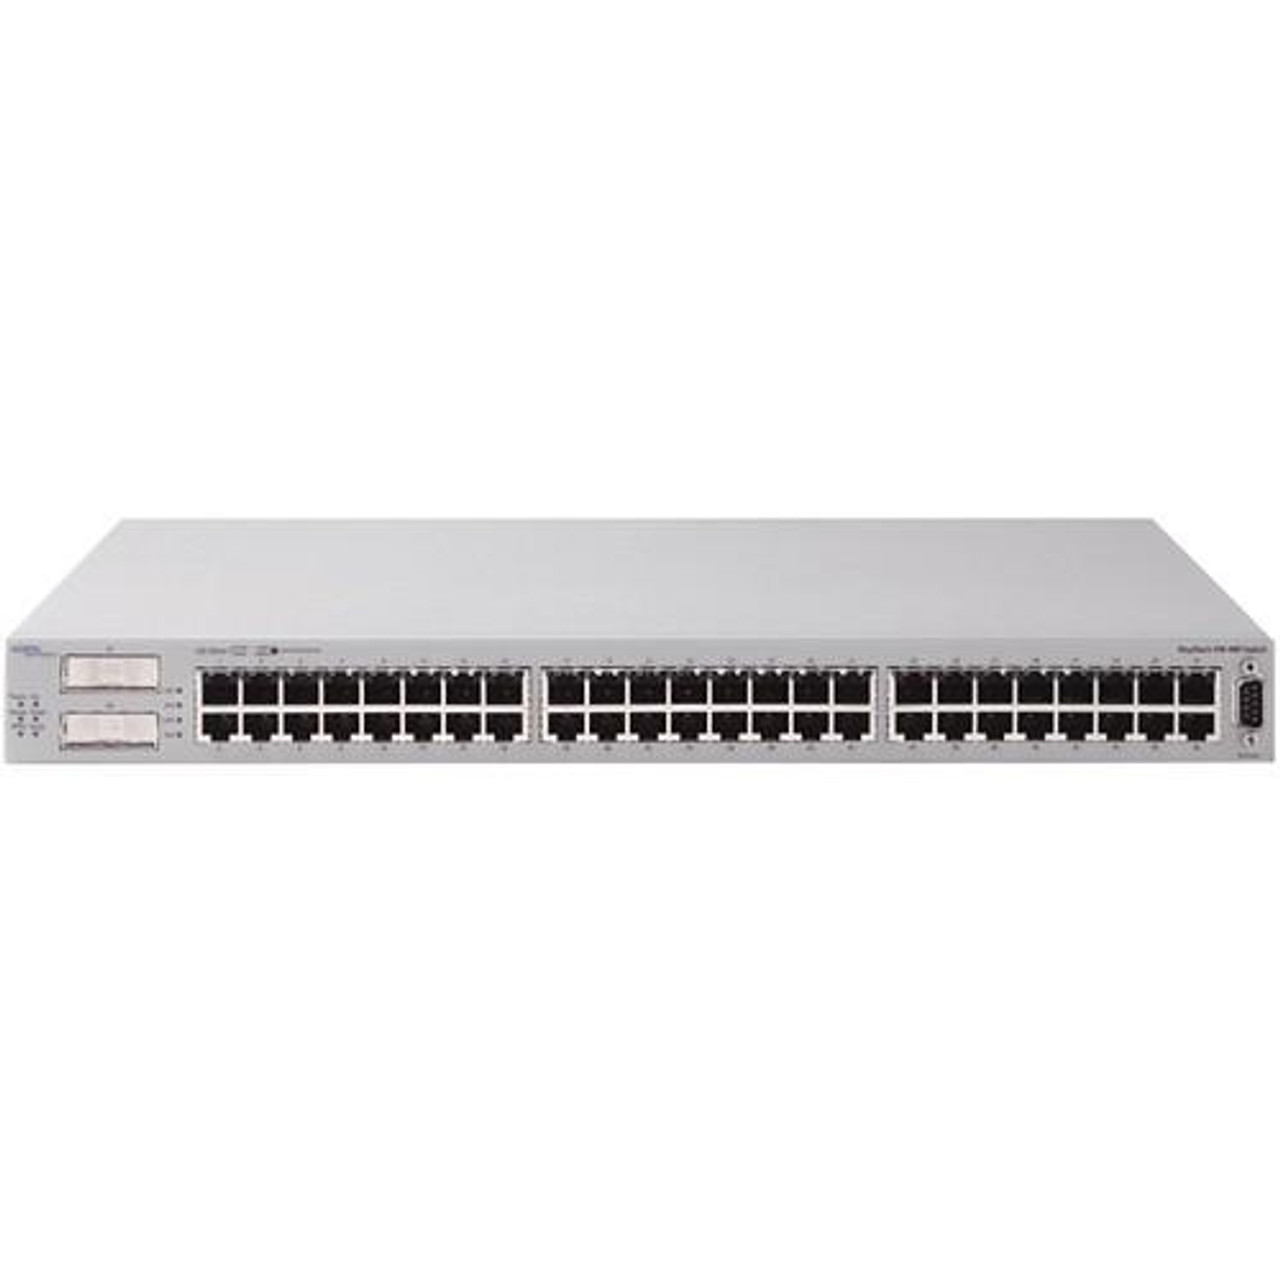 RMAL2012C52 Nortel Ethernet Switch 470-48T-PWR with 48-Ports 10/100 IEEE802.3af Power over Ethernet Ports and 2 Built-in GBIC- 46cm/18-Inch Stacking Cable and